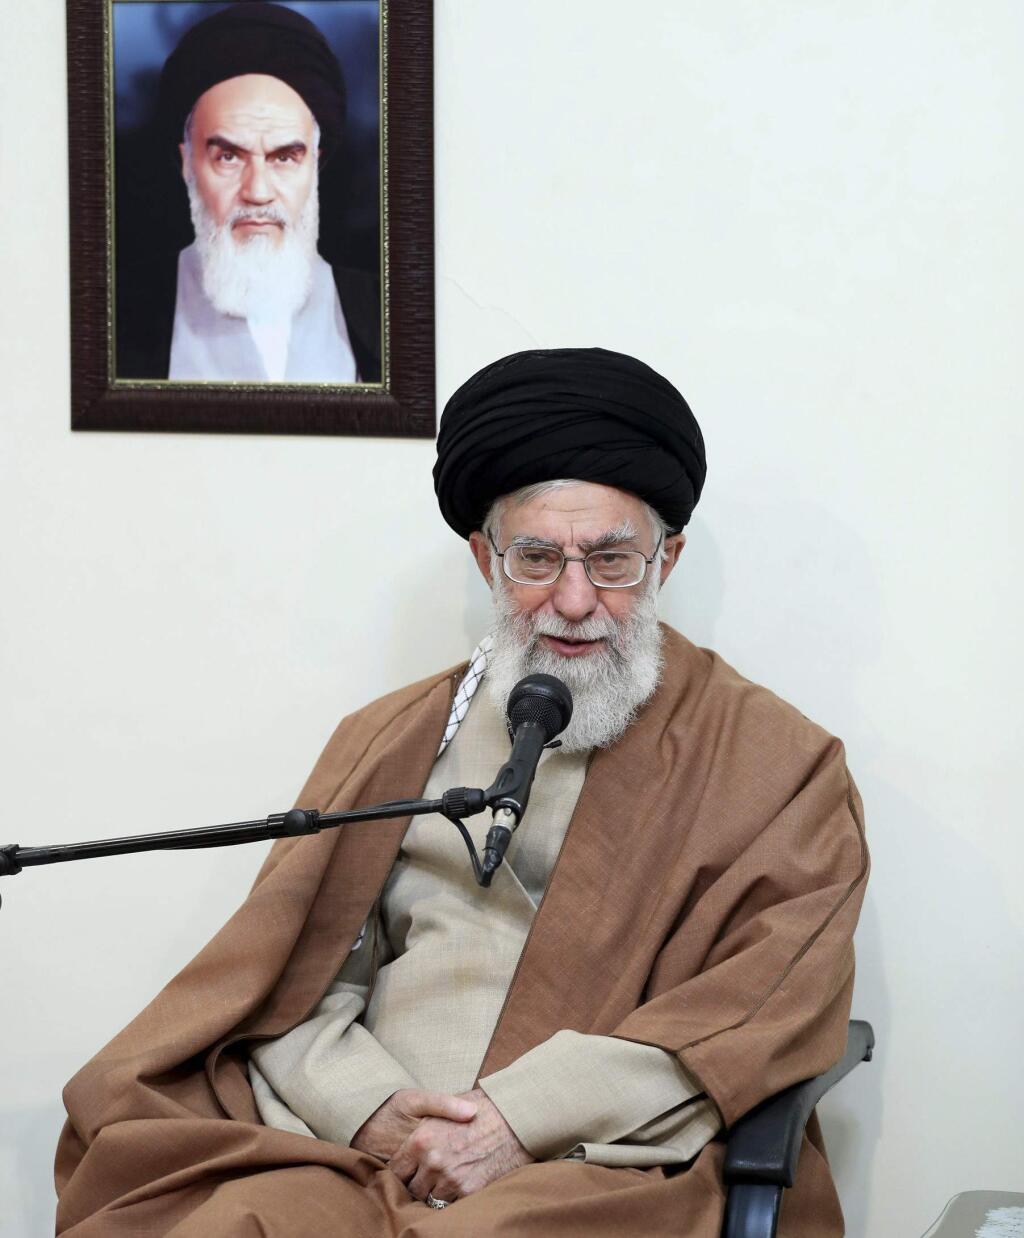 In this picture released by official website of the office of the Iranian supreme leader, Supreme Leader Ayatollah Ali Khamenei speaks in a meeting as he sits under a portrait of the late Iranian revolutionary founder Ayatollah Khomeini, in Tehran, Iran, Tuesday, Jan. 2, 2018. Khamenei said Tuesday that the country's enemies have meddled in recent protest rallies. The report on the website of Ayatollah Ali Khamenei quoted him as saying “in recent days” enemies of Iran have utilized various means including money, weapons, politics and intelligence apparatuses. (Office of the Iranian Supreme Leader via AP)